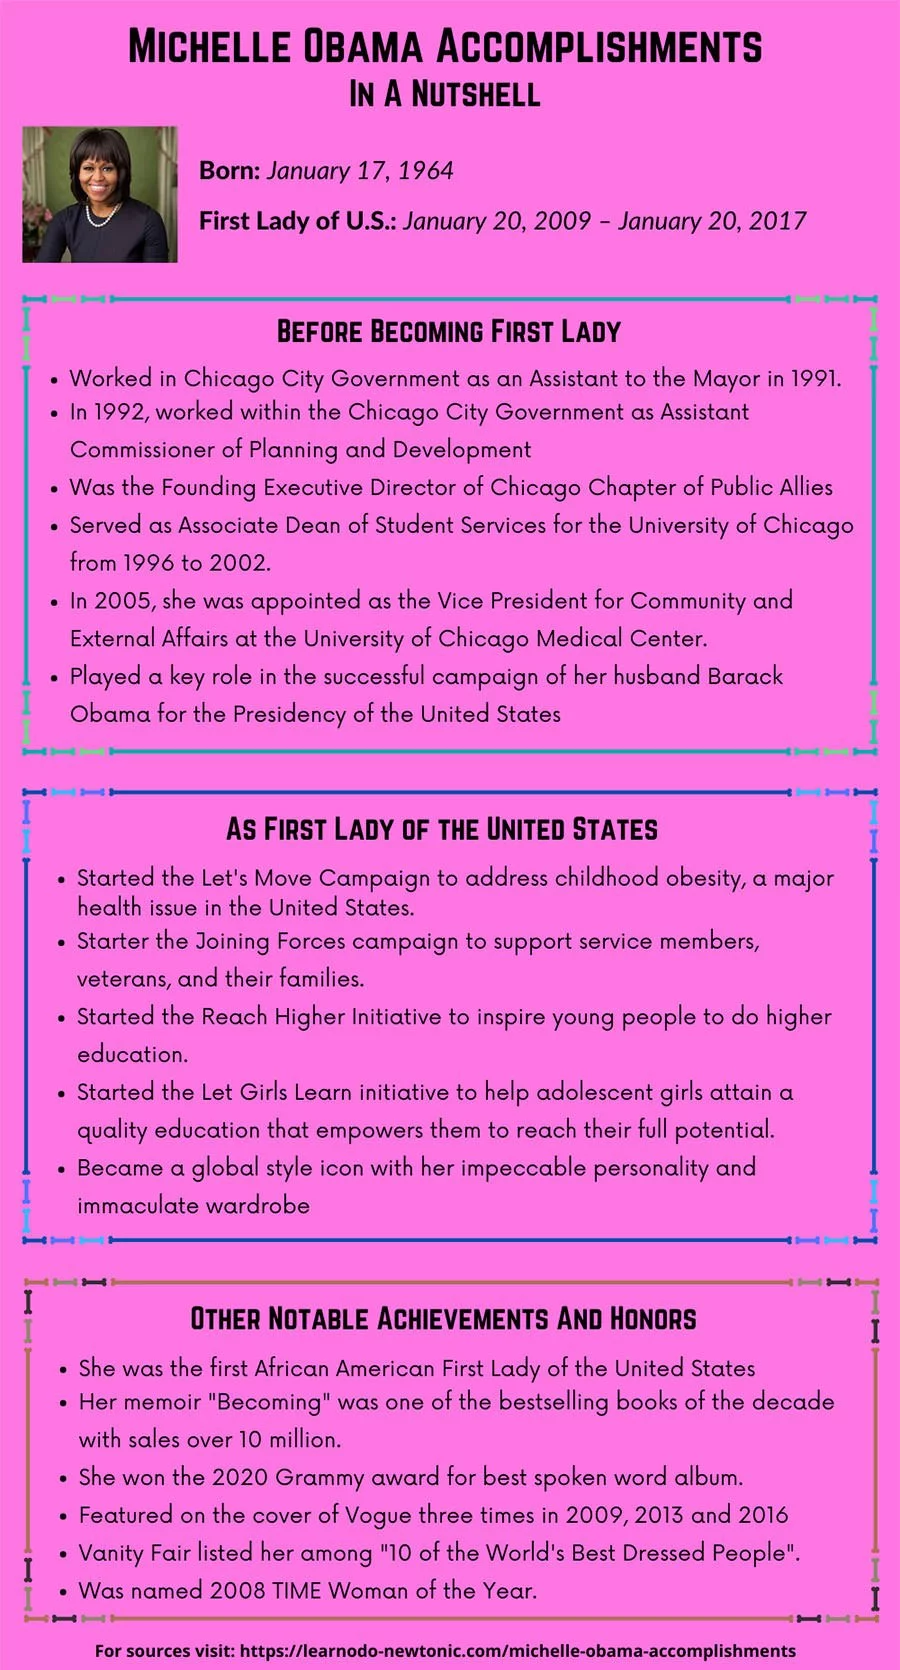 Michelle Obama Accomplishments - In A Nutshell